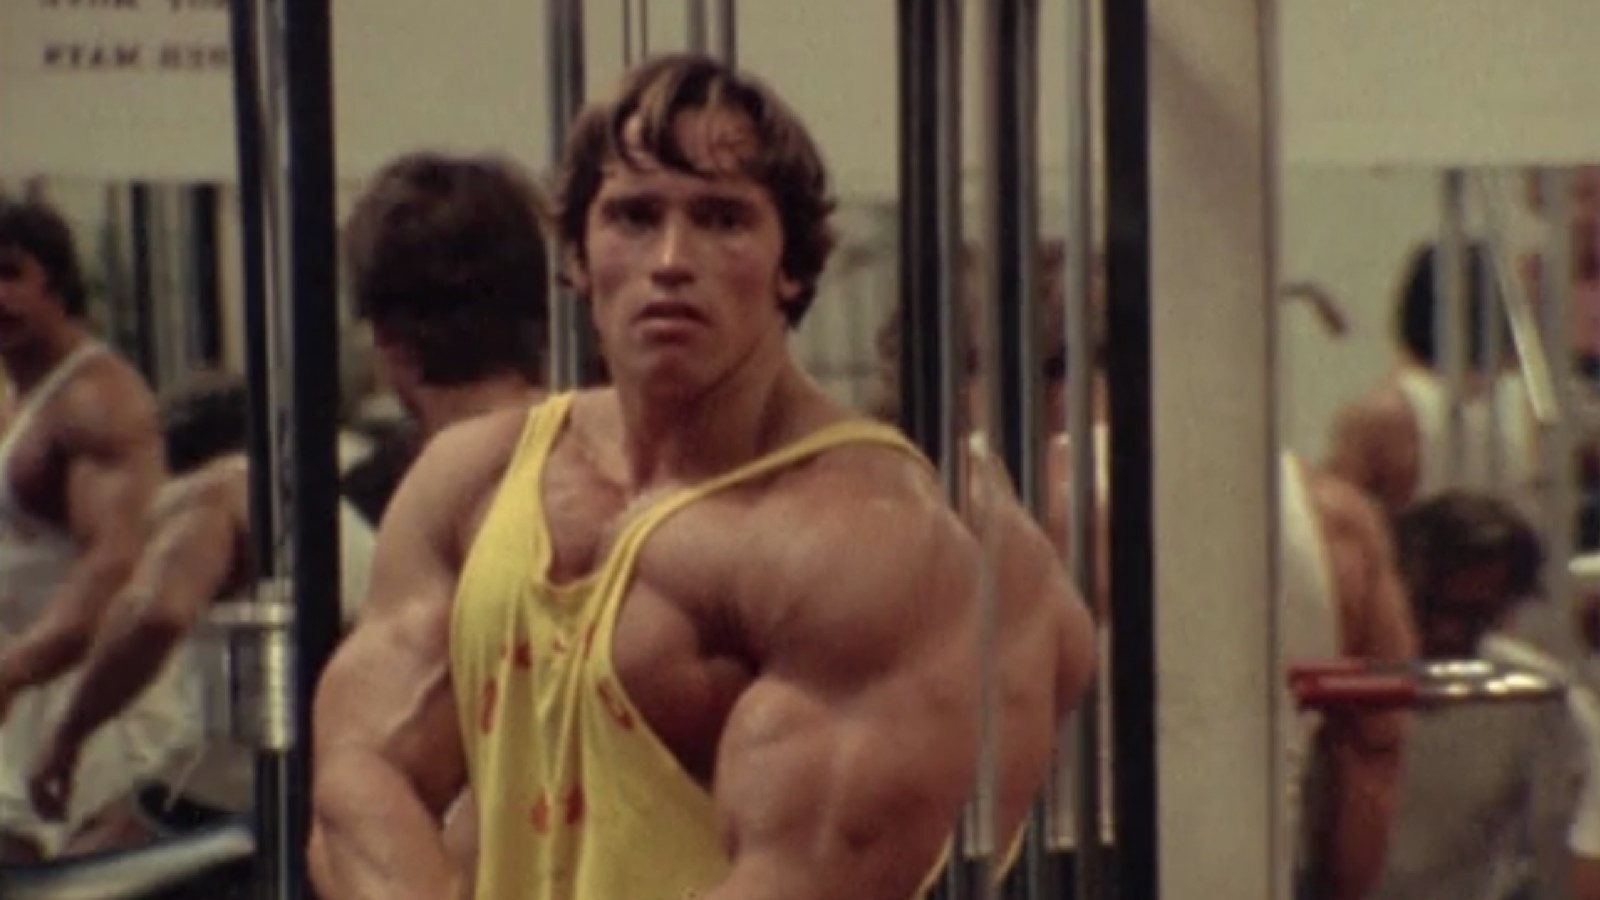 Arnold Schwarzenegger's Workout Routine for the 1975 Mr. Olympia